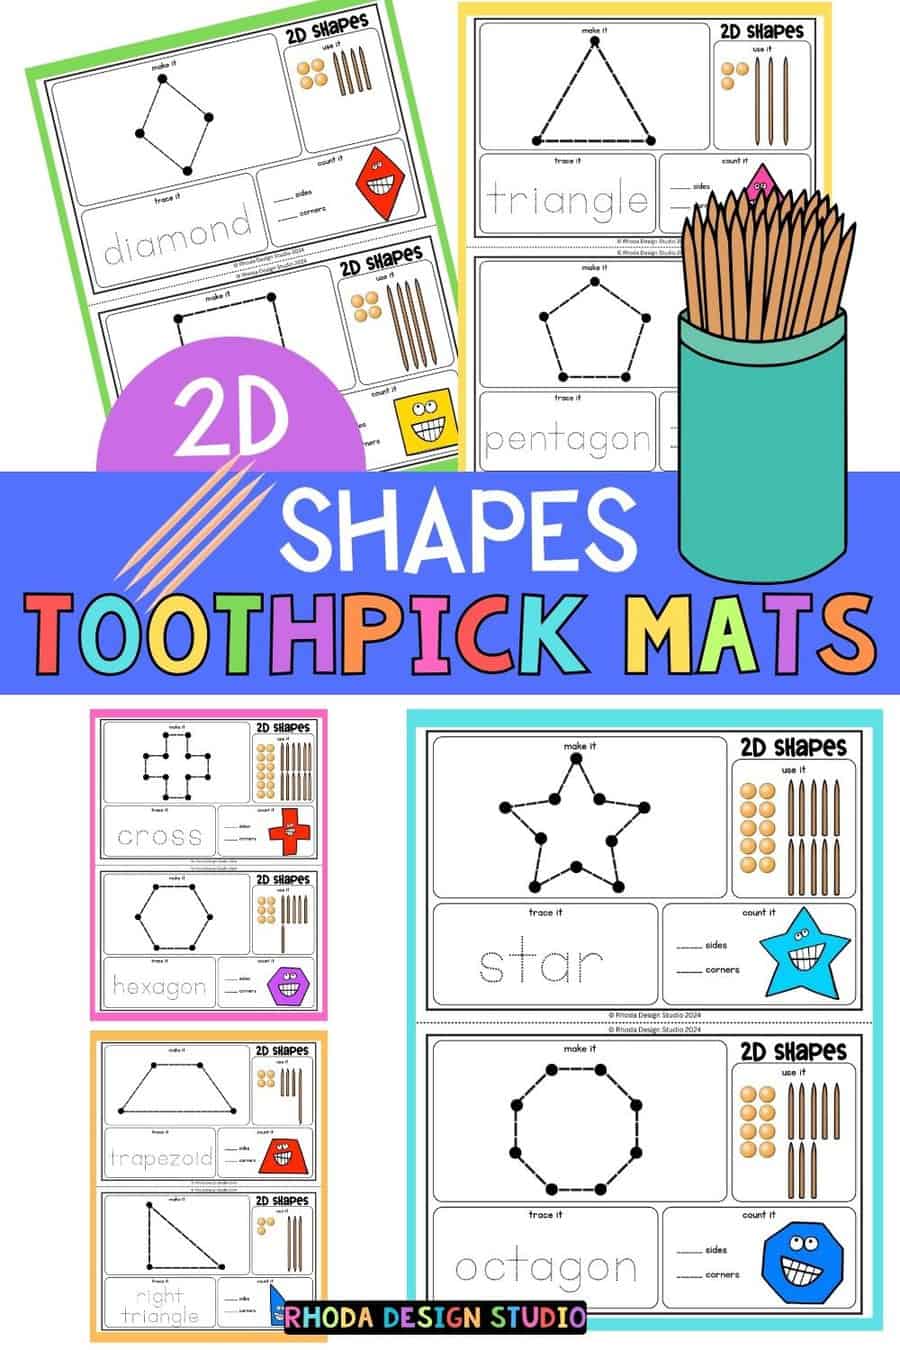 12 Free Hands on Learning 2D Shapes Activities with Toothpicks